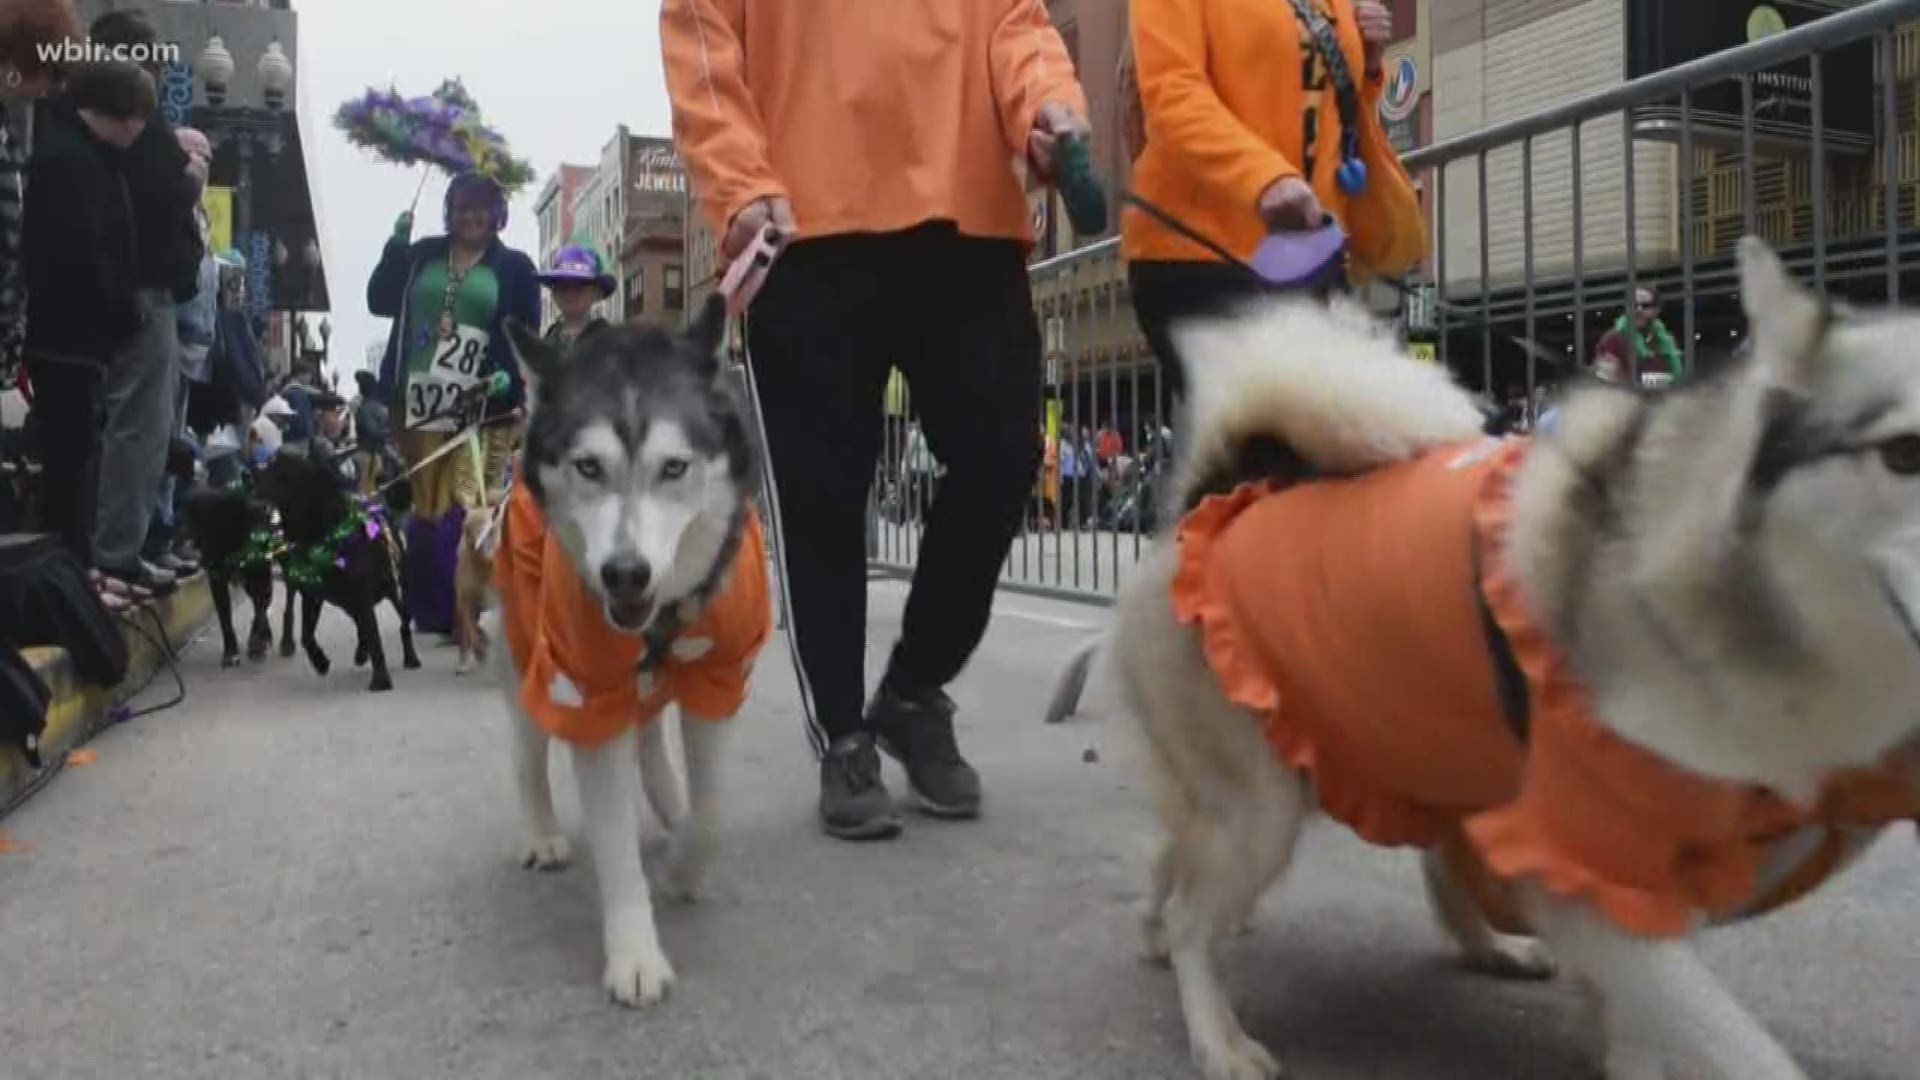 Mardi Growl 2020 parade and pet party on March 7, from11am to 3pm in downtown Knoxville,  mardigrowl.org. Feb. 24, 2020-4pm.